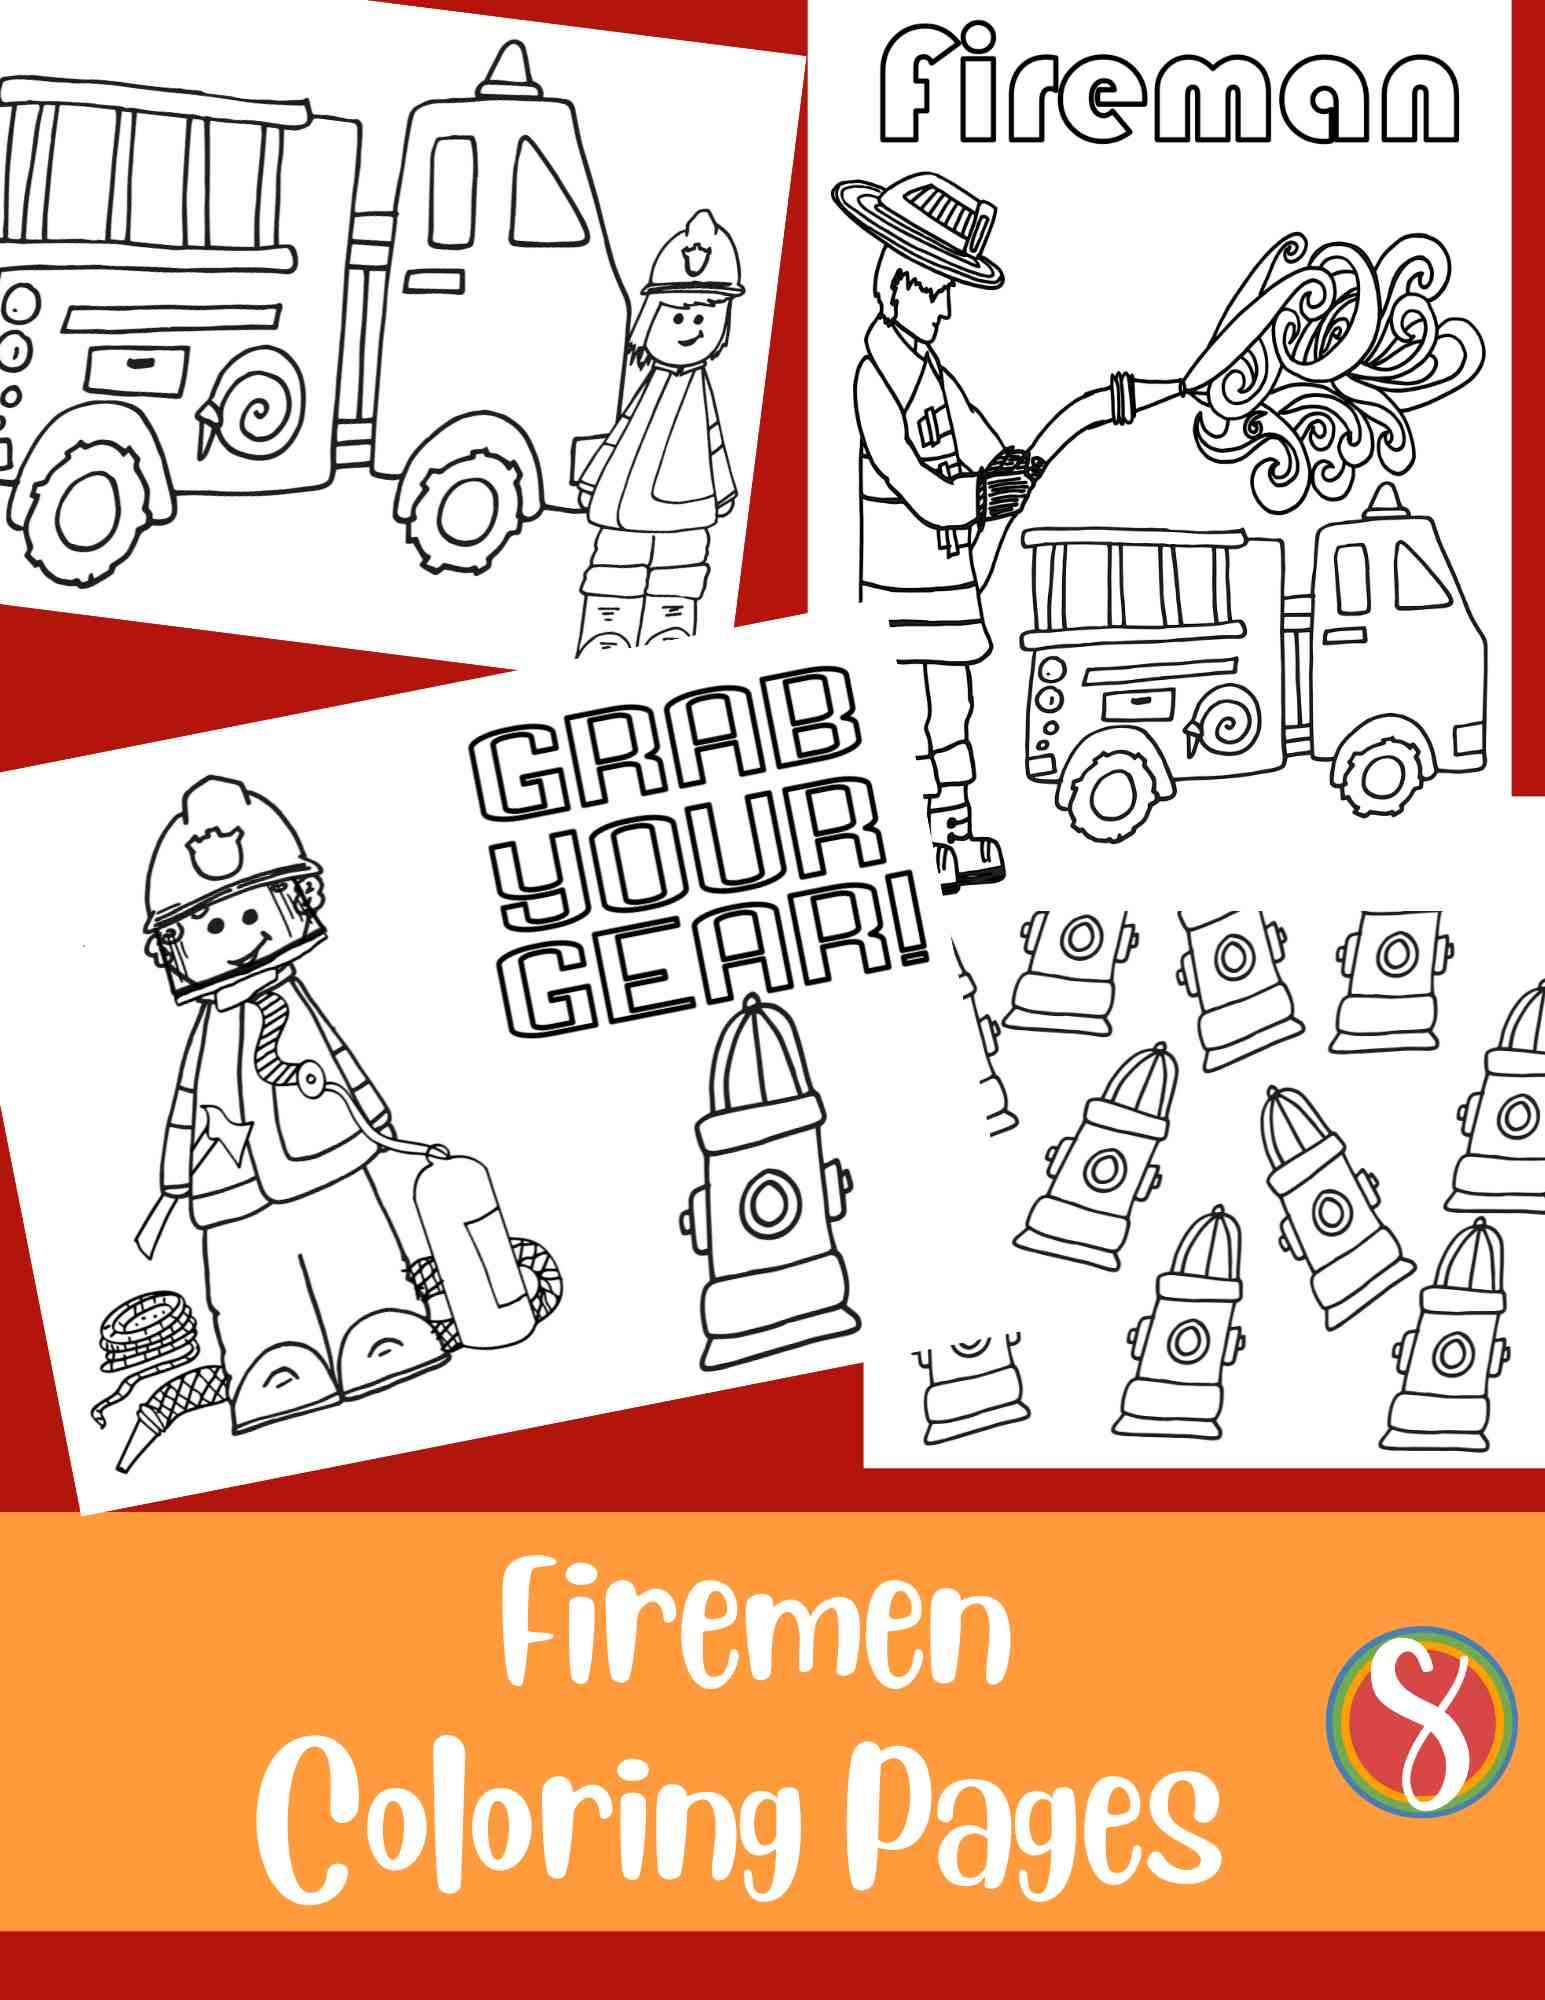 a collage of firemen and firetruck coloring pages